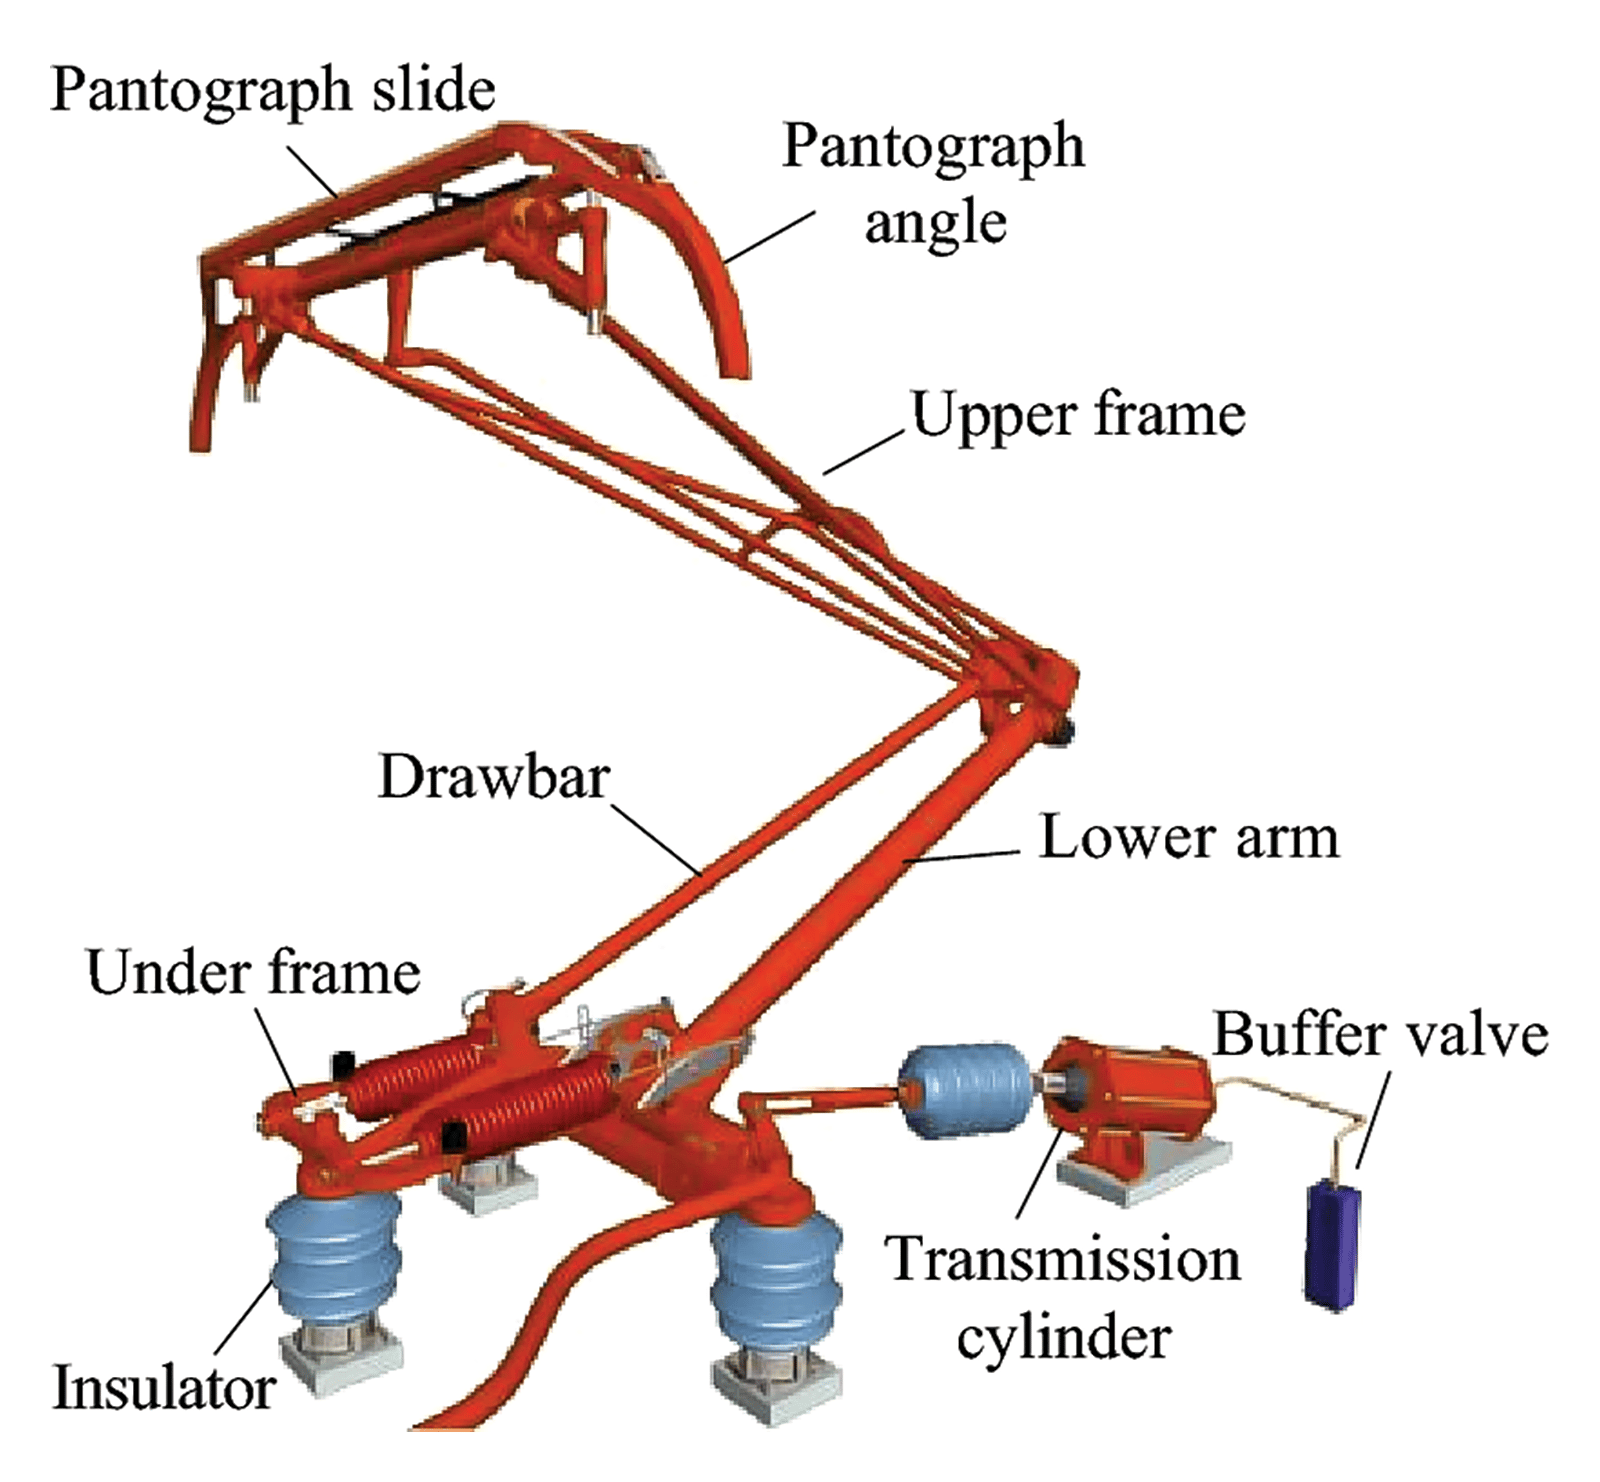 Schematic structure of a pantograph